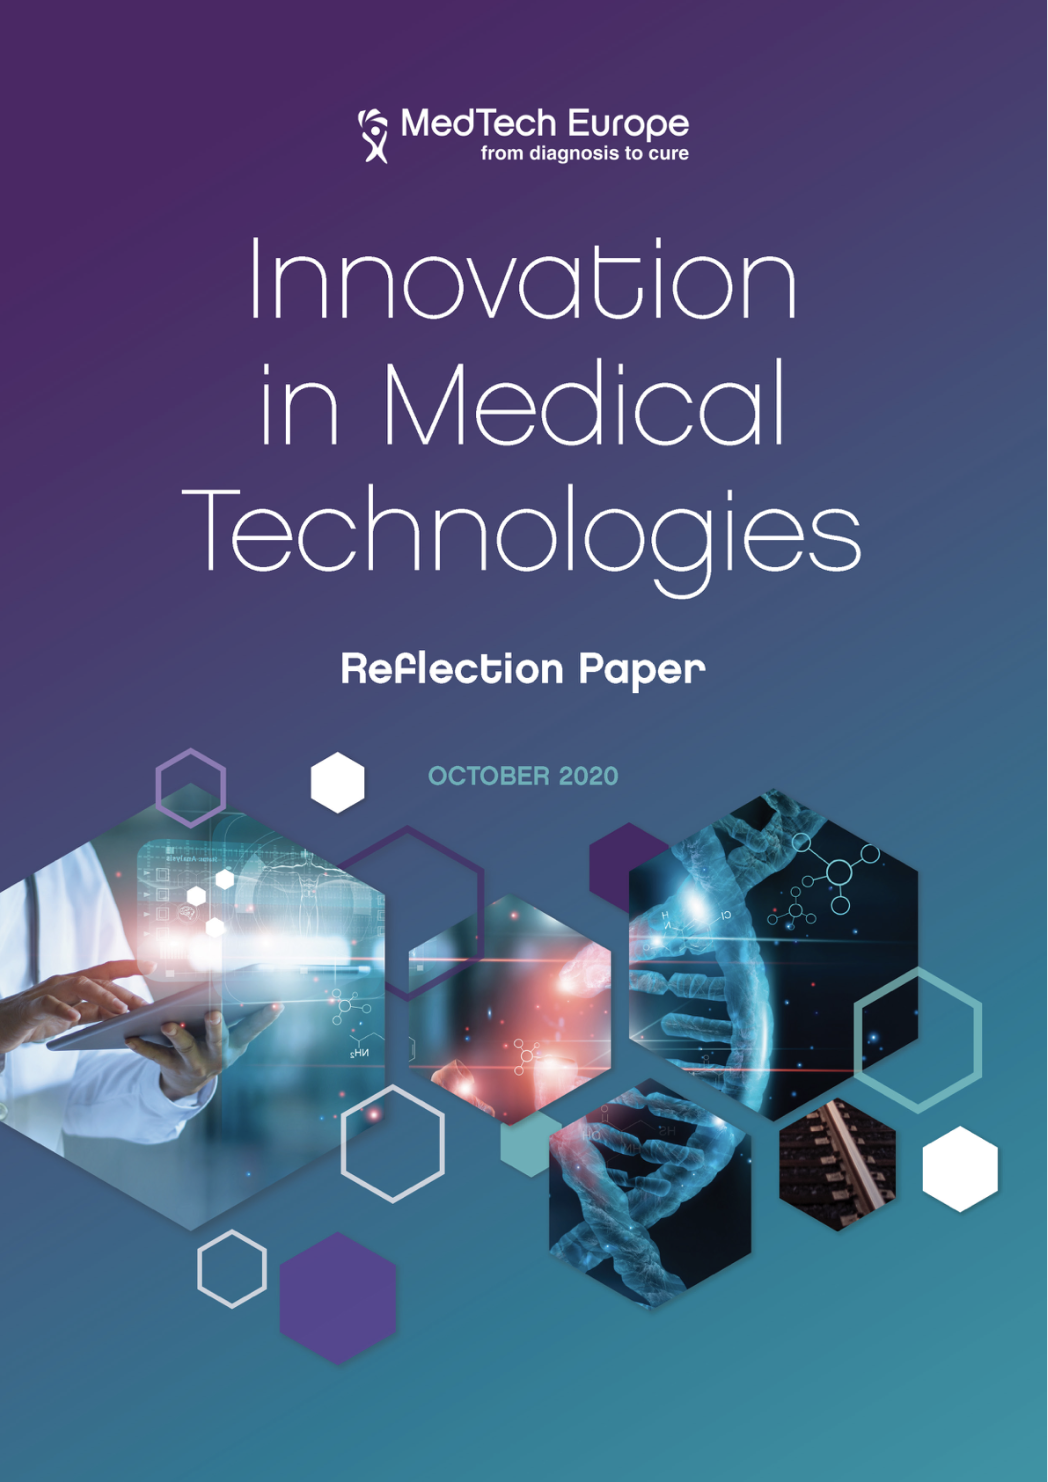 technology innovation research papers